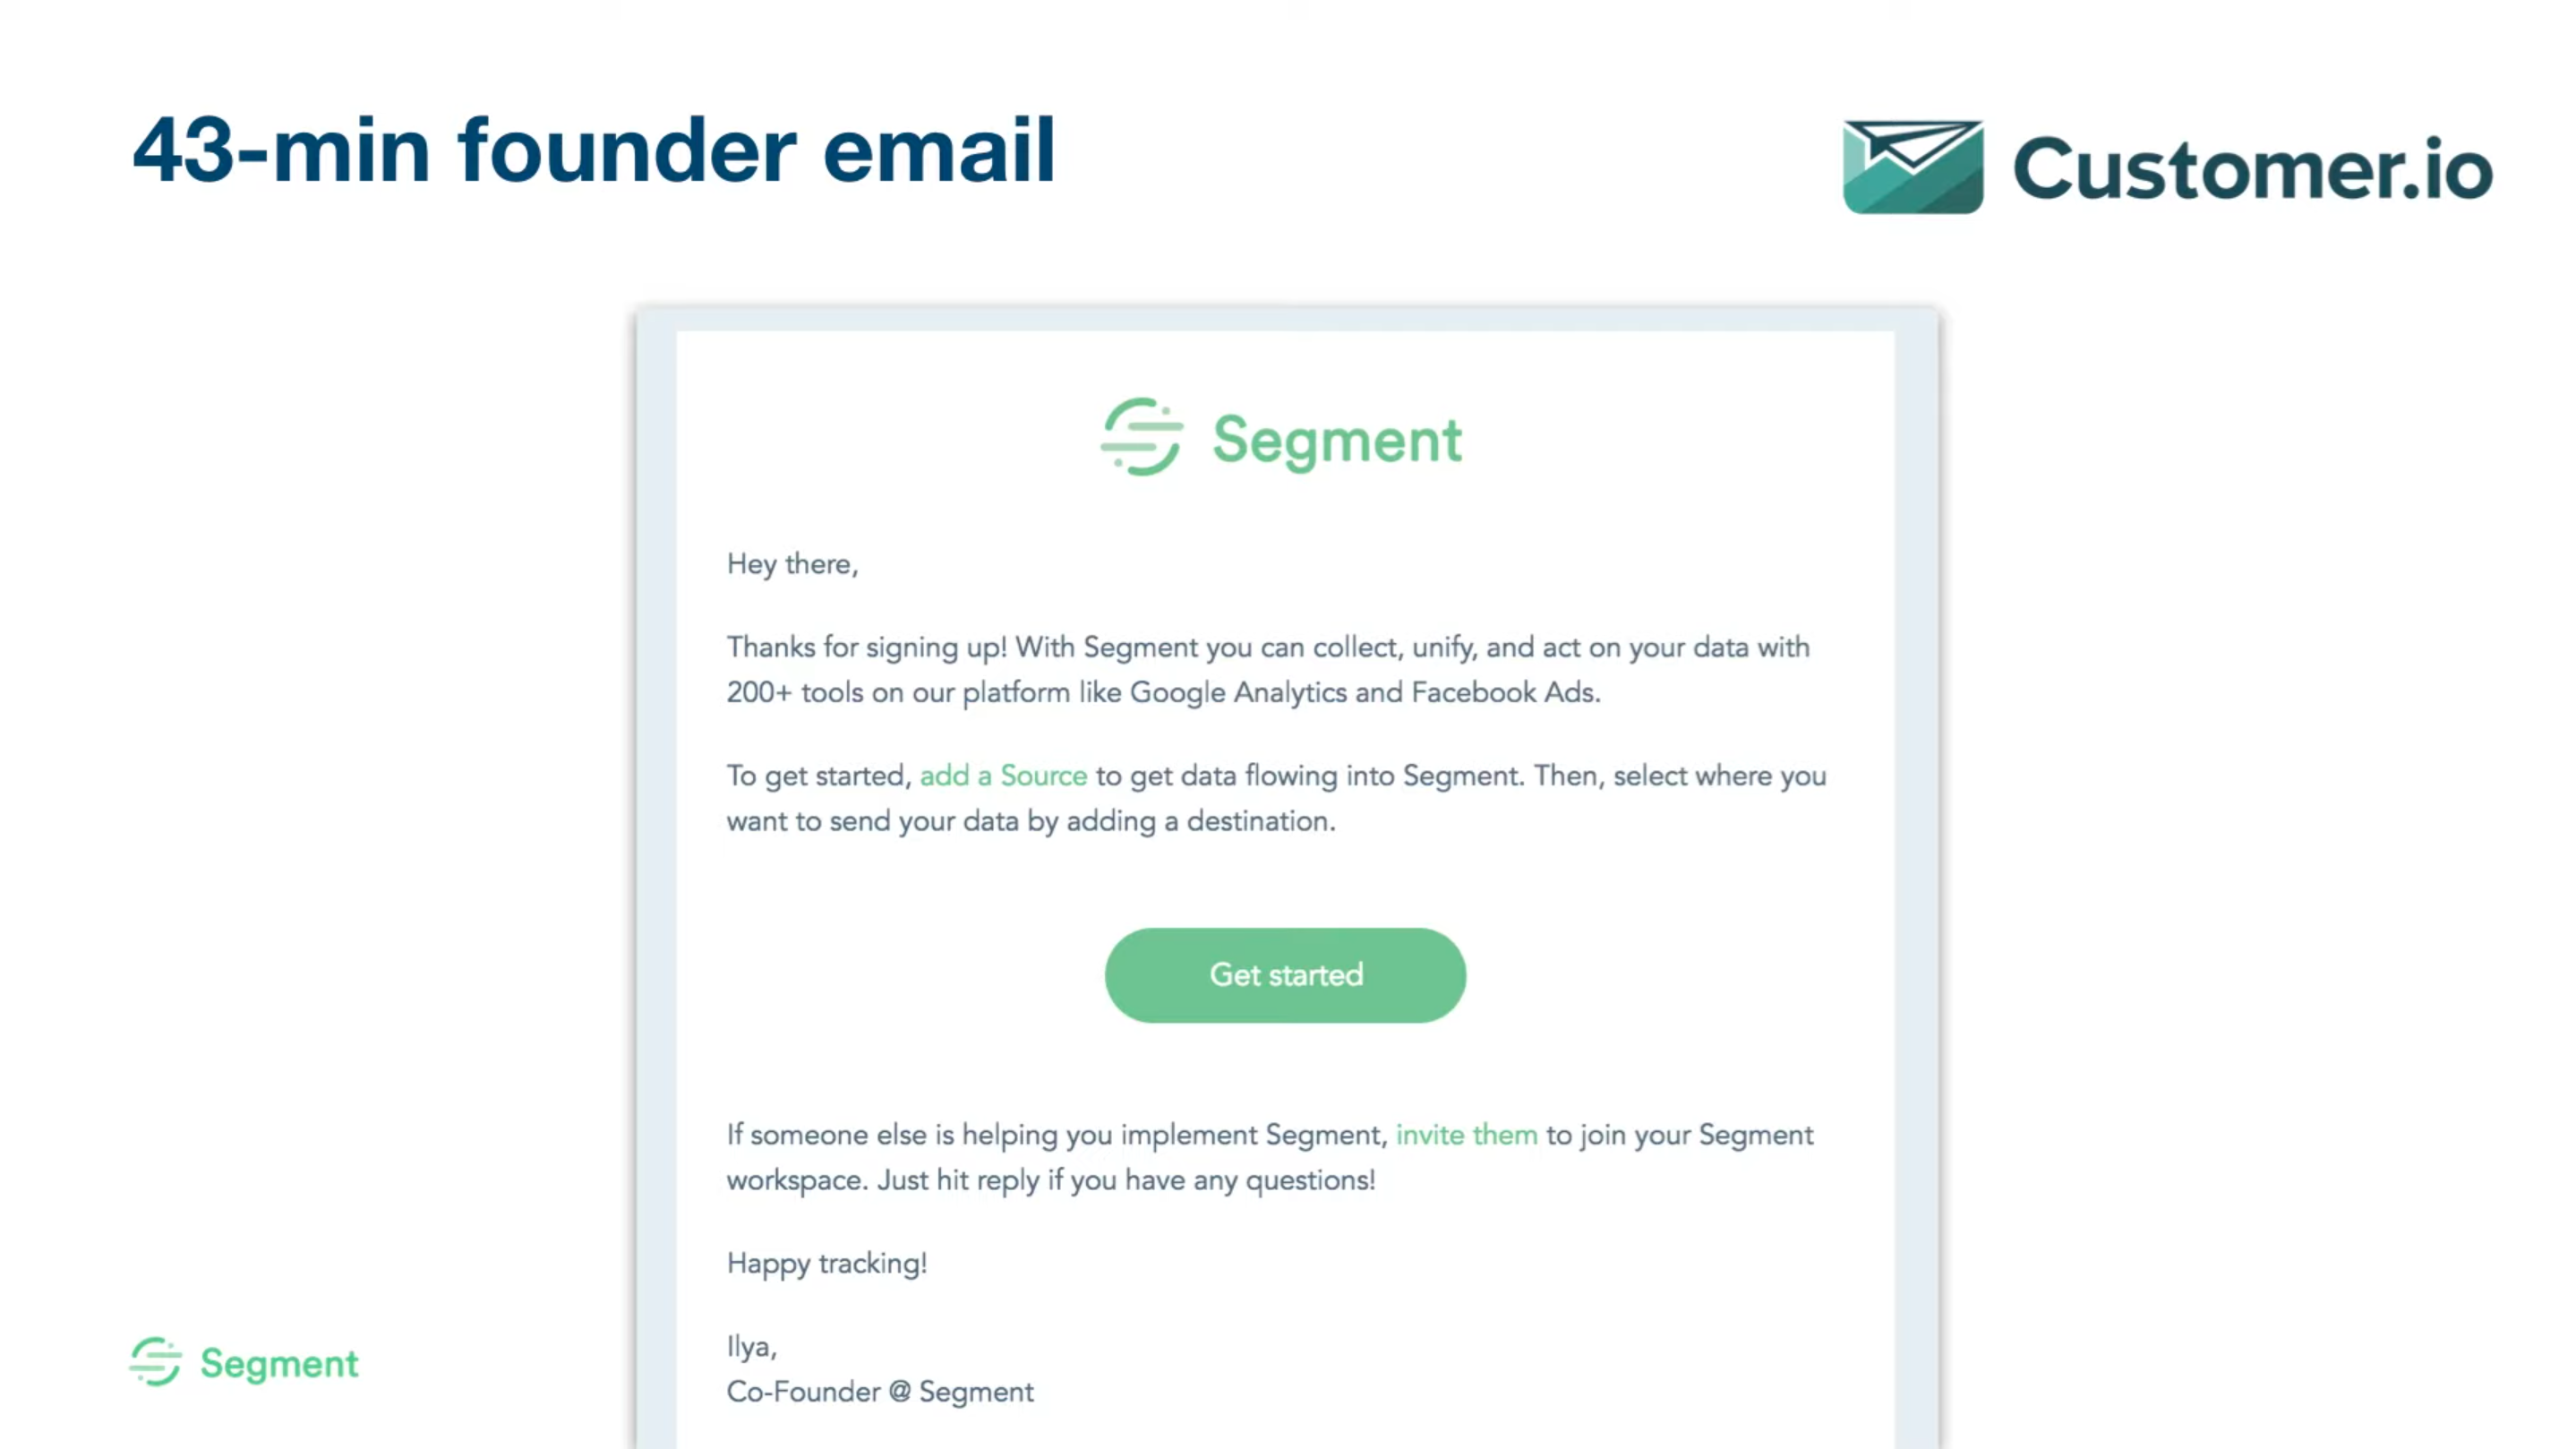 Segment's 43-minute founder email